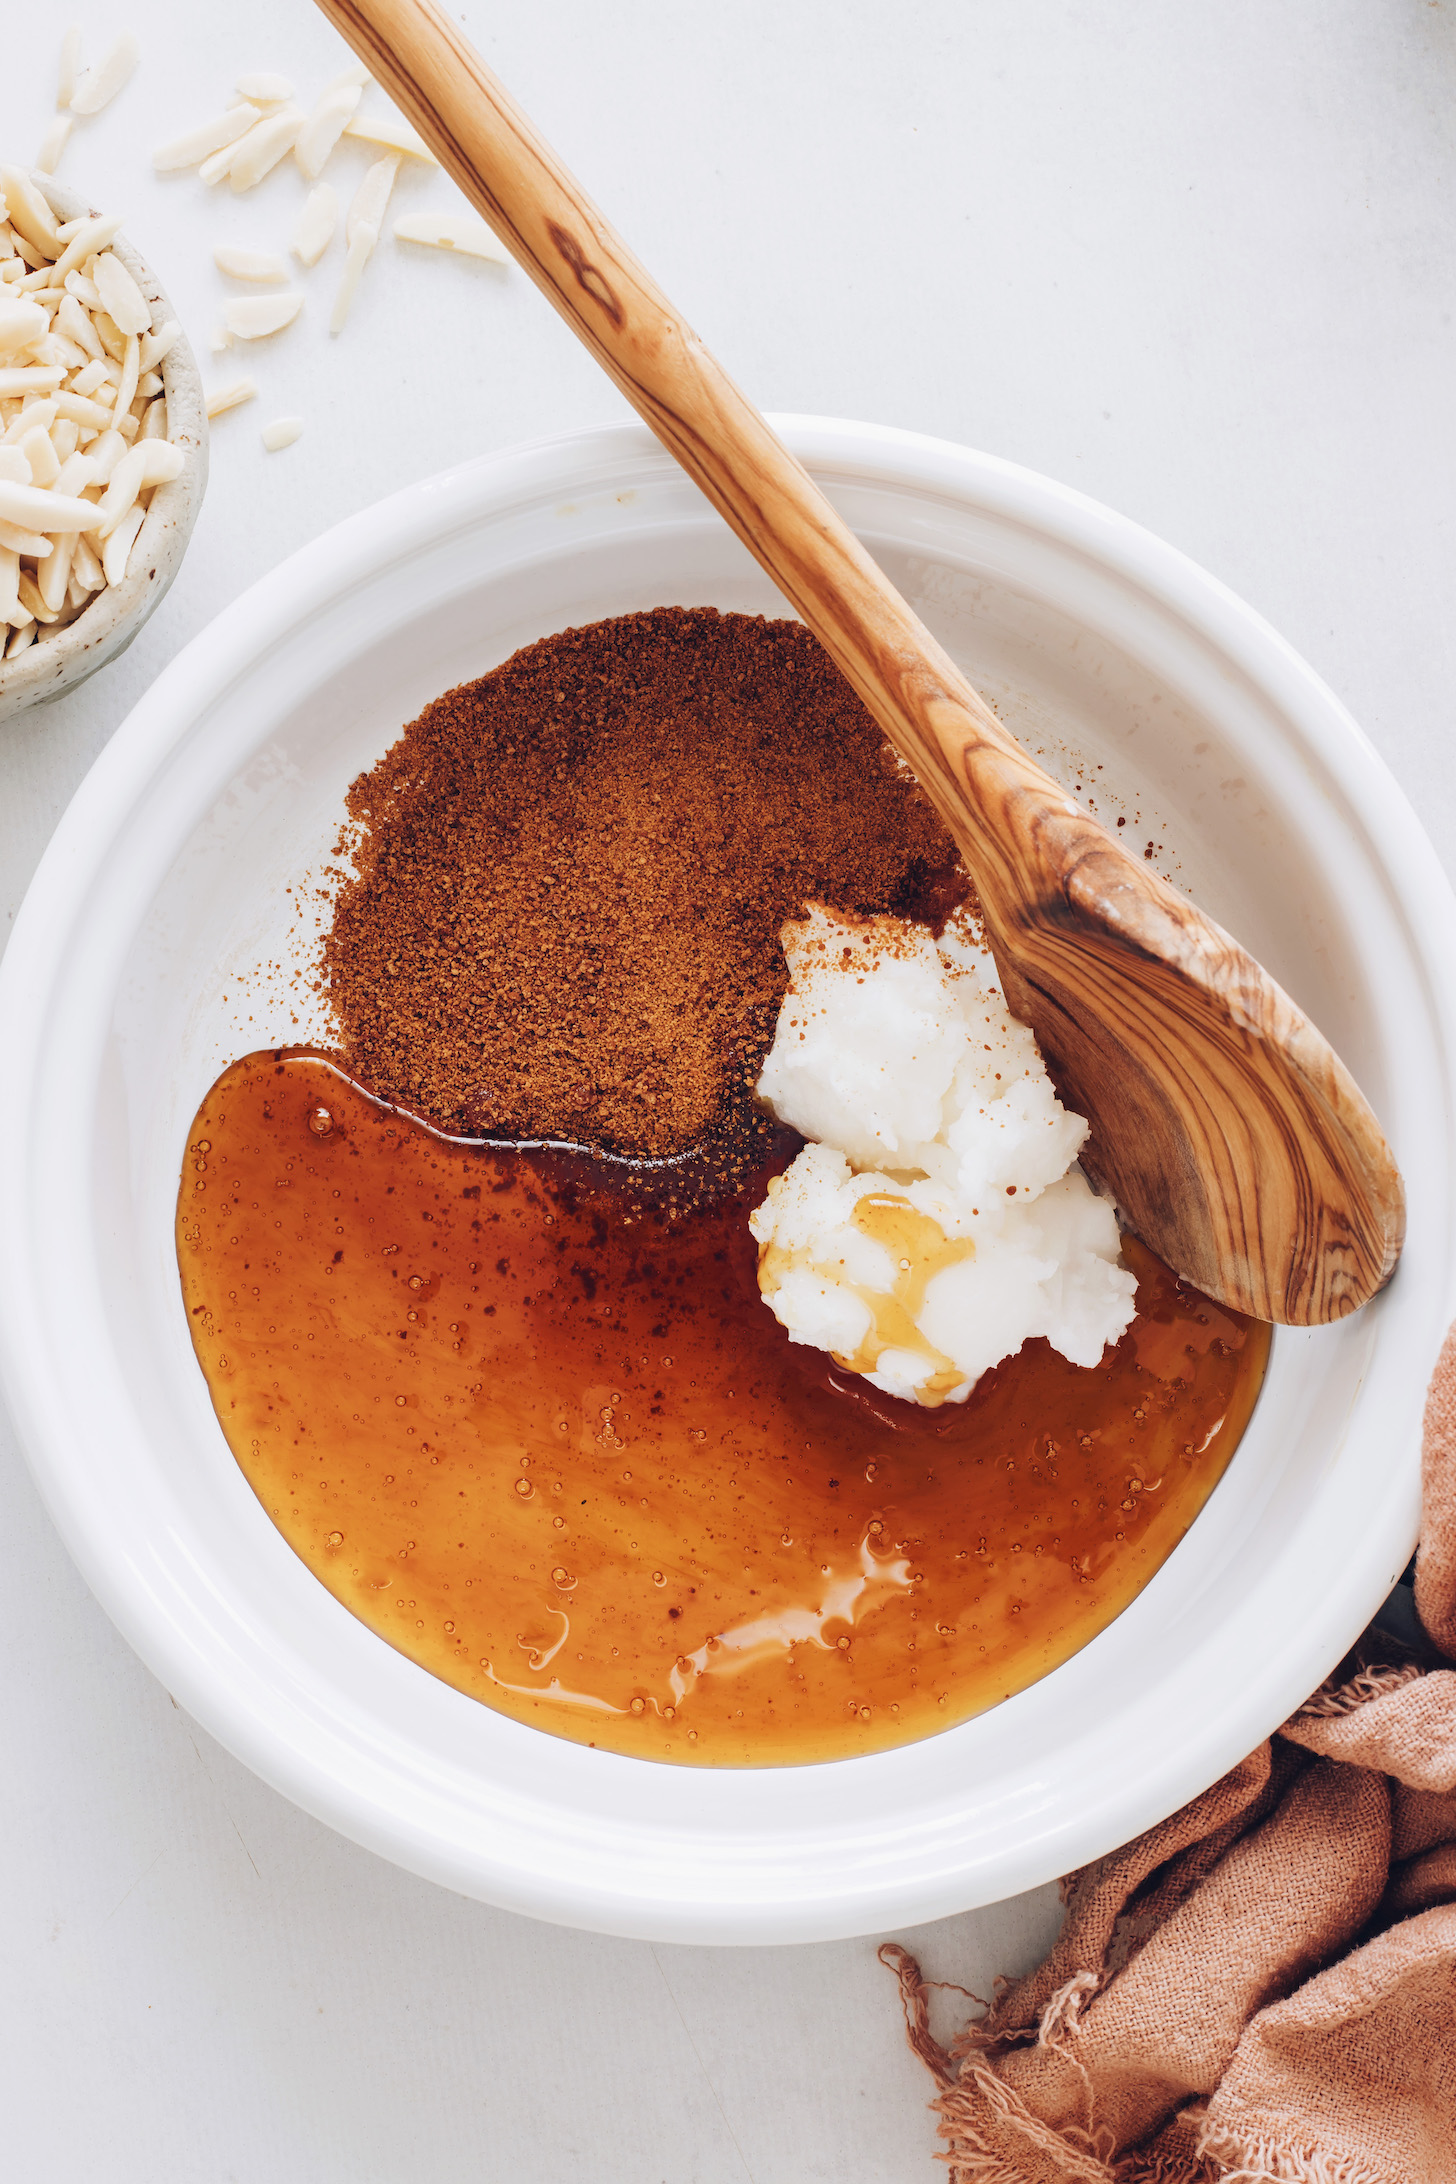 Coconut oil, coconut sugar, and maple syrup in a saucepan